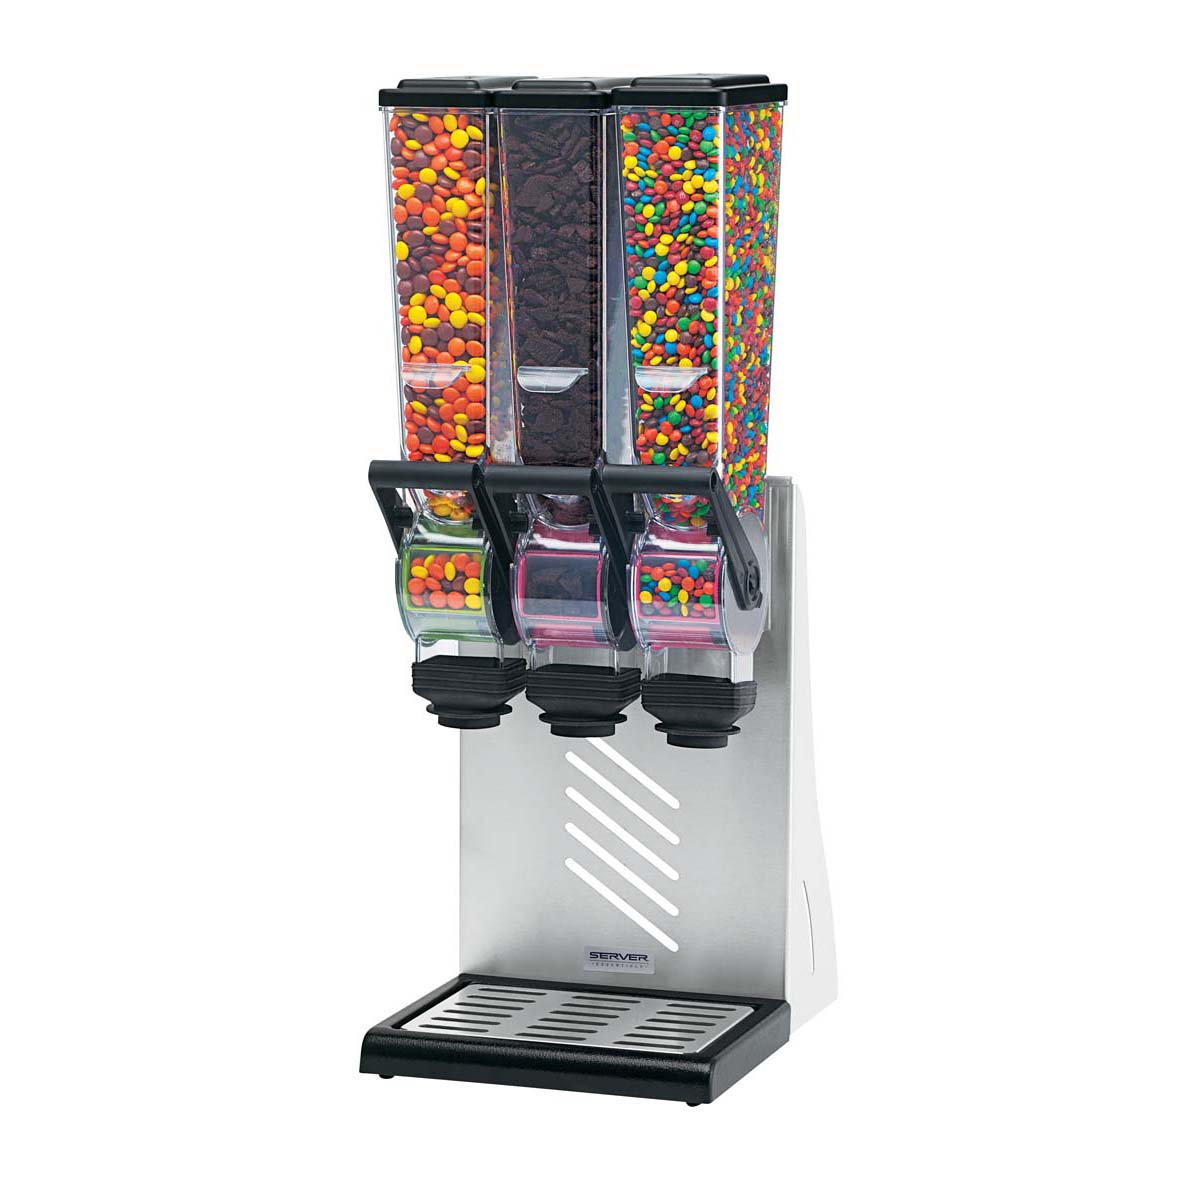 Slimline Dry Food Candy Dispensers Countertop Server Products